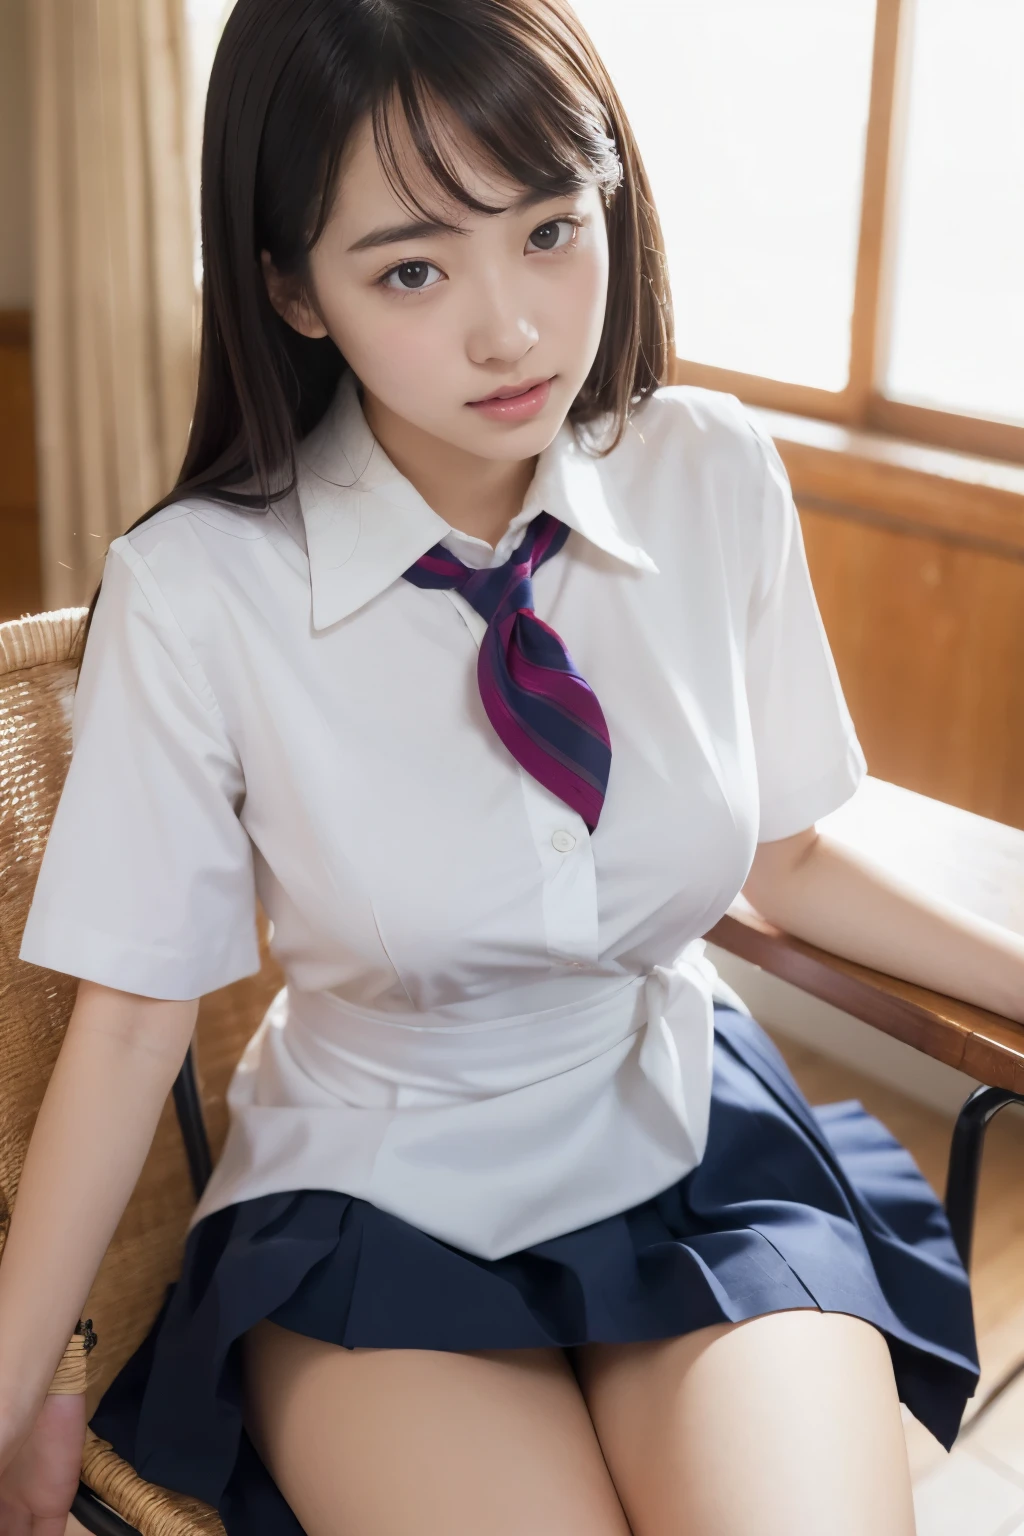 ((Big Breasts))、From above、8k, highest quality, (Skin dents), morning, (bright), blurred background, indoor, (street:0.6), (), Beautiful Bangs, nice,, (dress, High School Uniforms:1.3),Soft lighting,(((I&#39;m not wearing a skirt))), Charm, classroom,School, machine,Chair ,White light, (Mouth closed:1.2, Beautiful Eyes、ロケット型のBig Breasts, Fine grain, Detailed Iris, Beautiful Lips, Beautiful Nose, Beautiful Face)、Relaxed pose with relaxed shoulders、Small cotton thong panties、skirtlift,panties
highleg panties